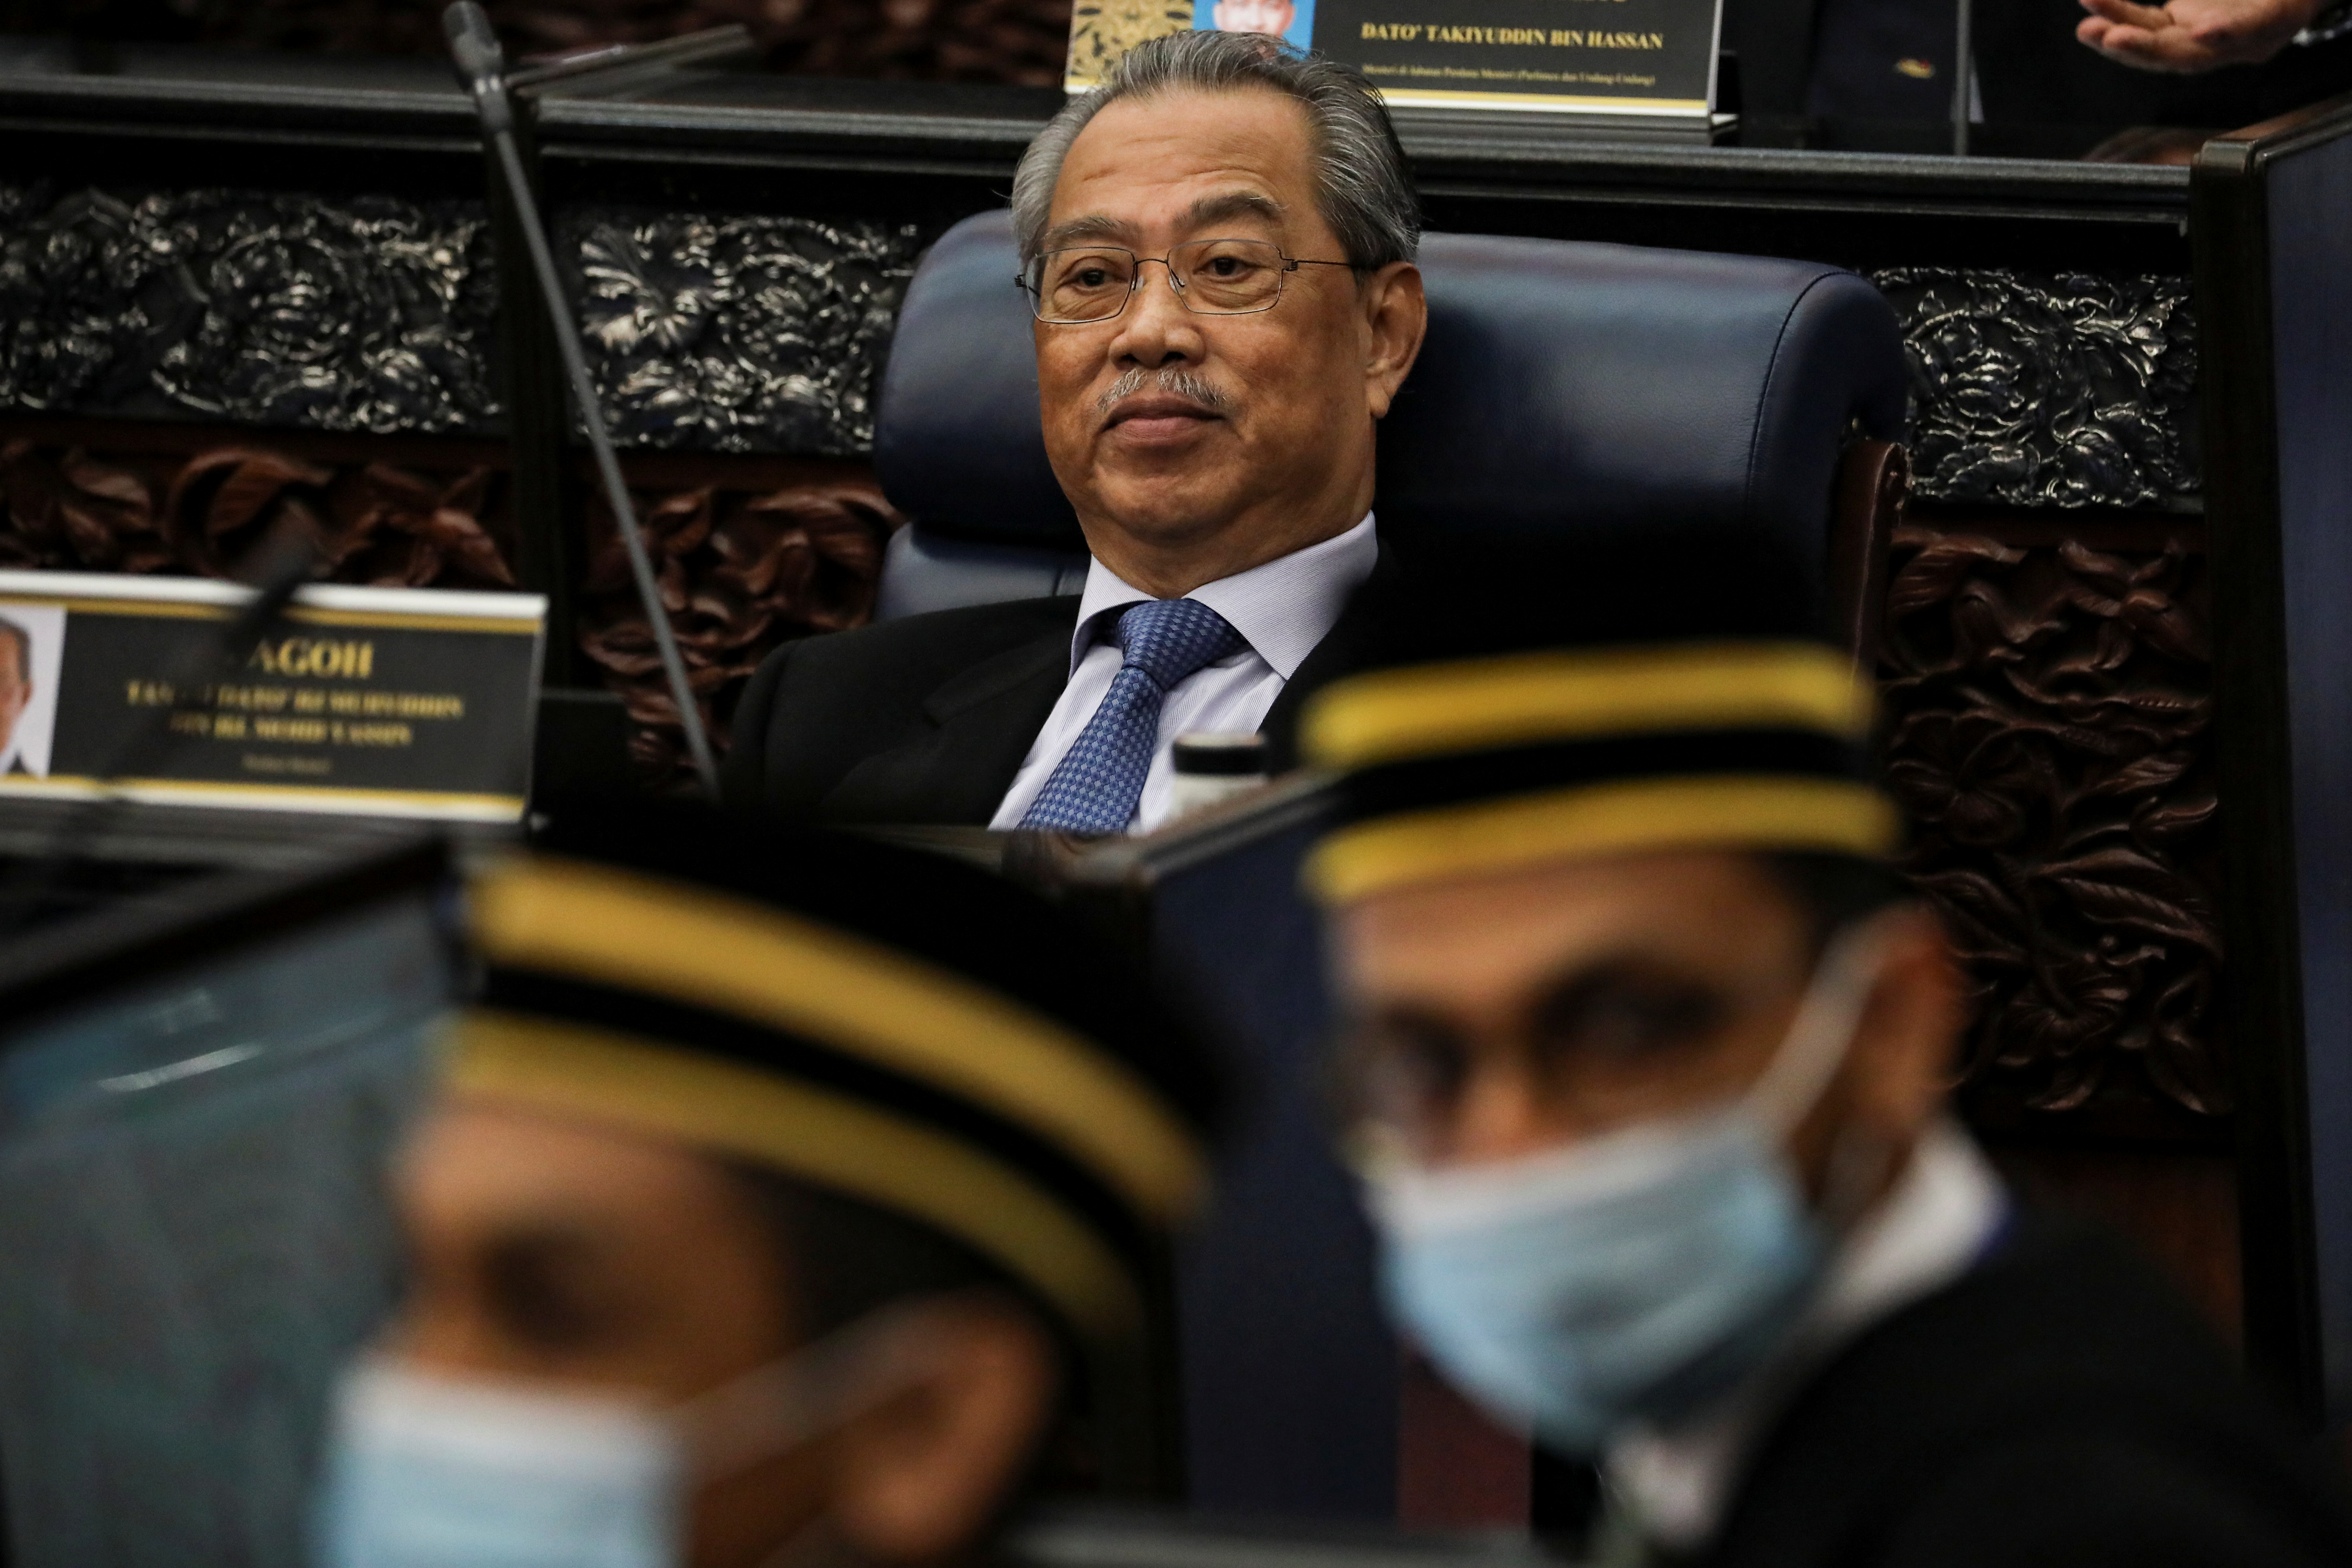 Malaysia's Prime Minister Muhyiddin Yassin reacts during a session of the lower house of parliament, in Kuala Lumpur, Malaysia July 13, 2020. REUTERS/Lim Huey Teng